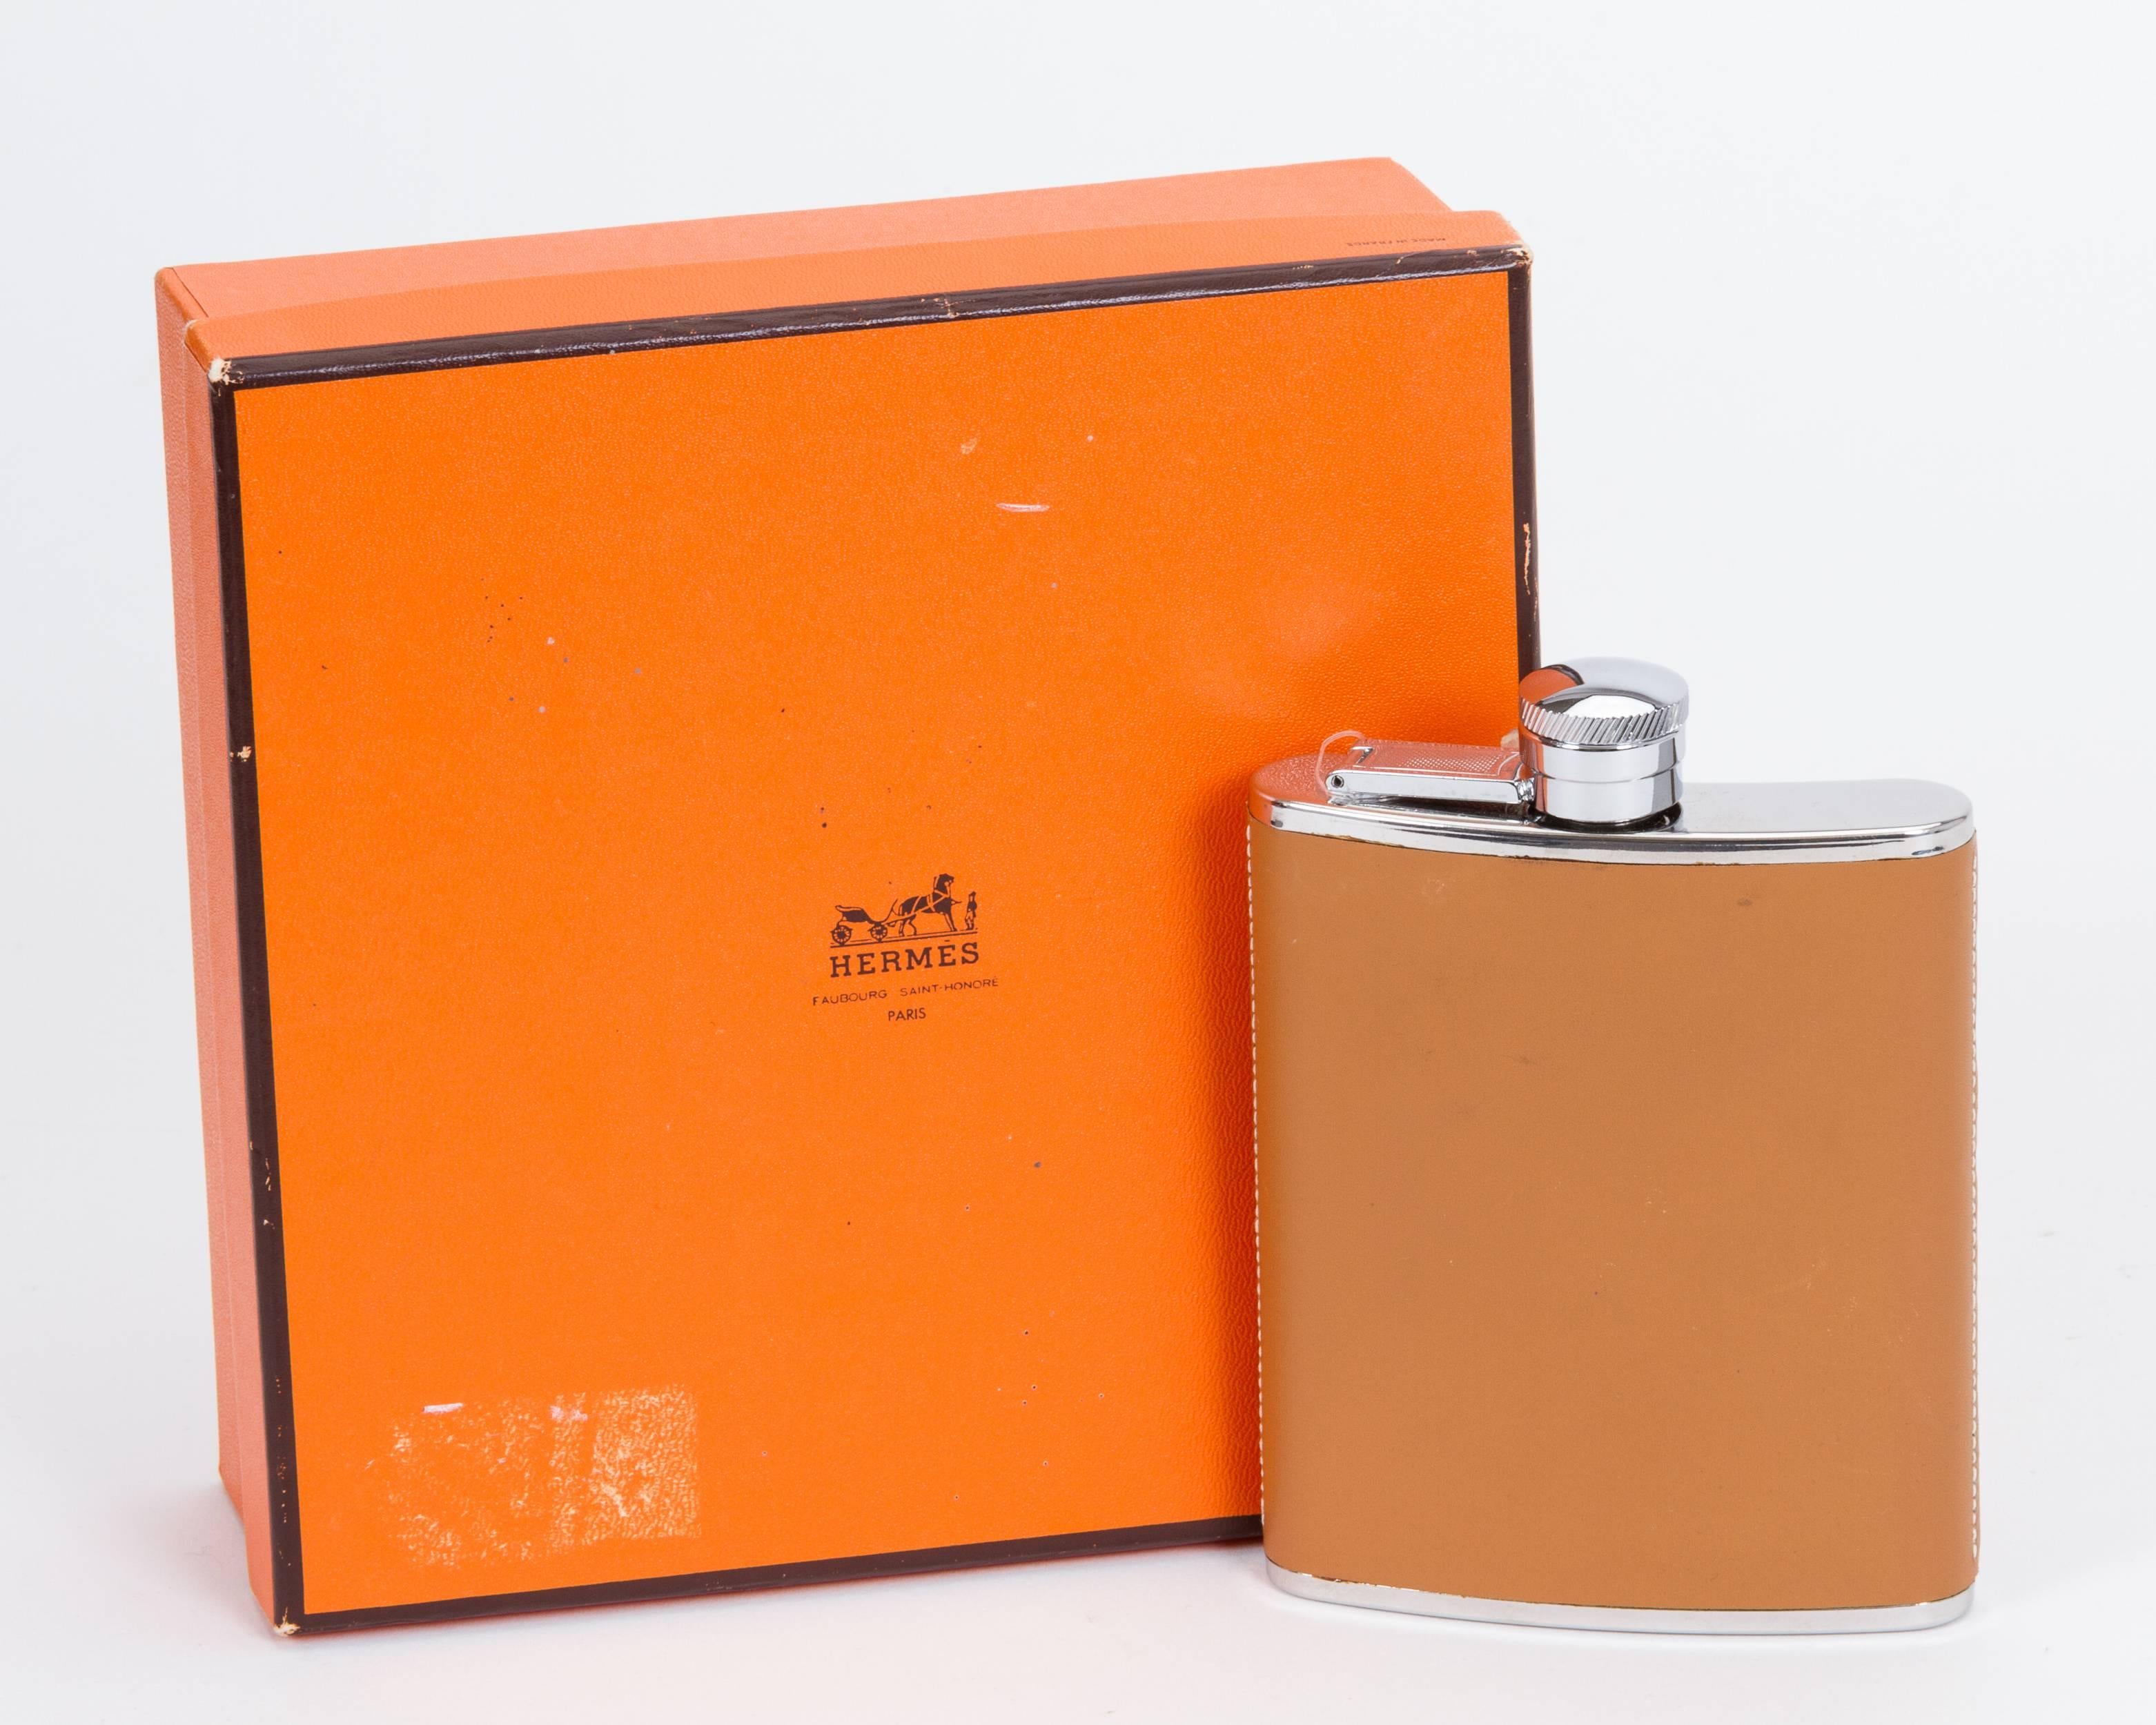 Hermès brand new in box whisky flask covered in box leather. Winter 96 collection. Comes with original tag, box and ribbon.
